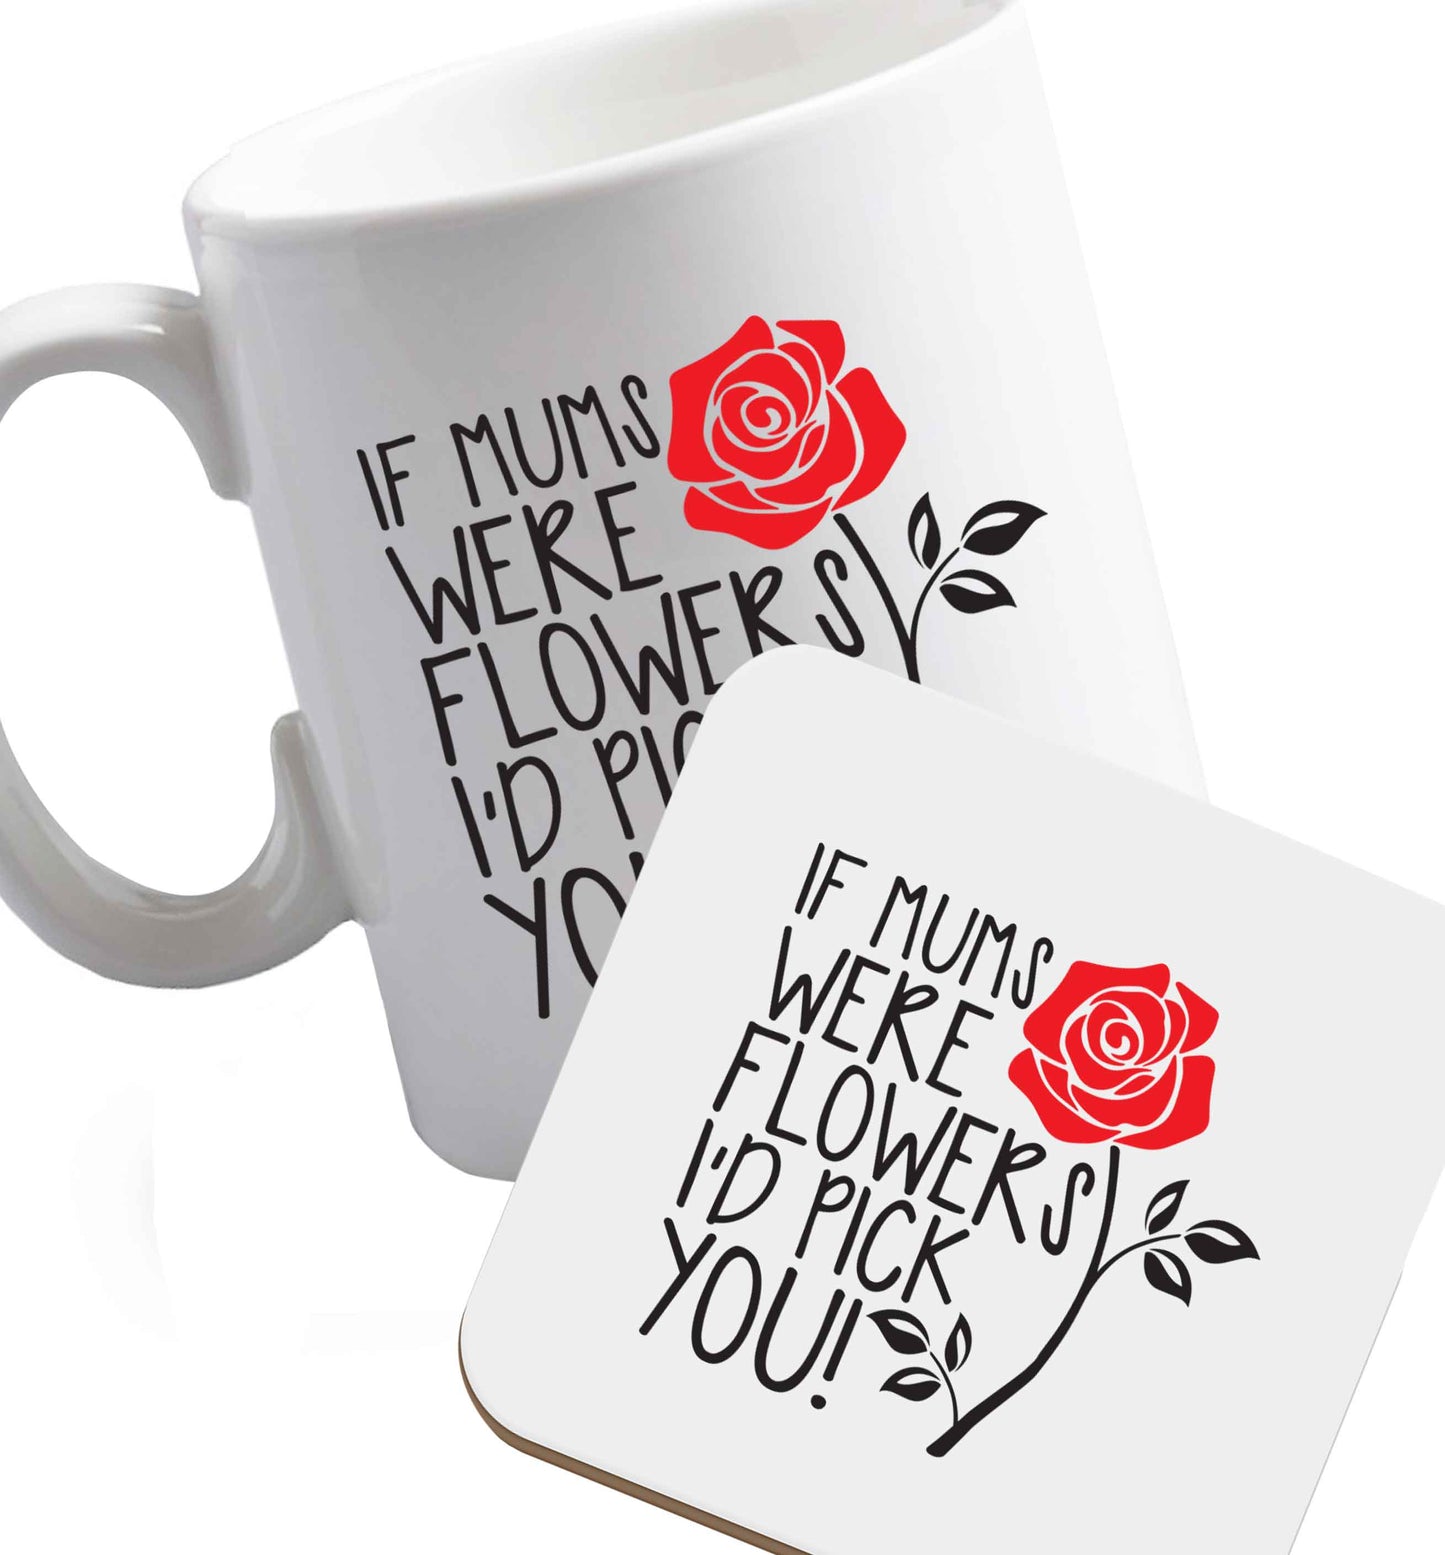 10 oz If mums were flowers I'd pick you! ceramic mug and coaster set right handed